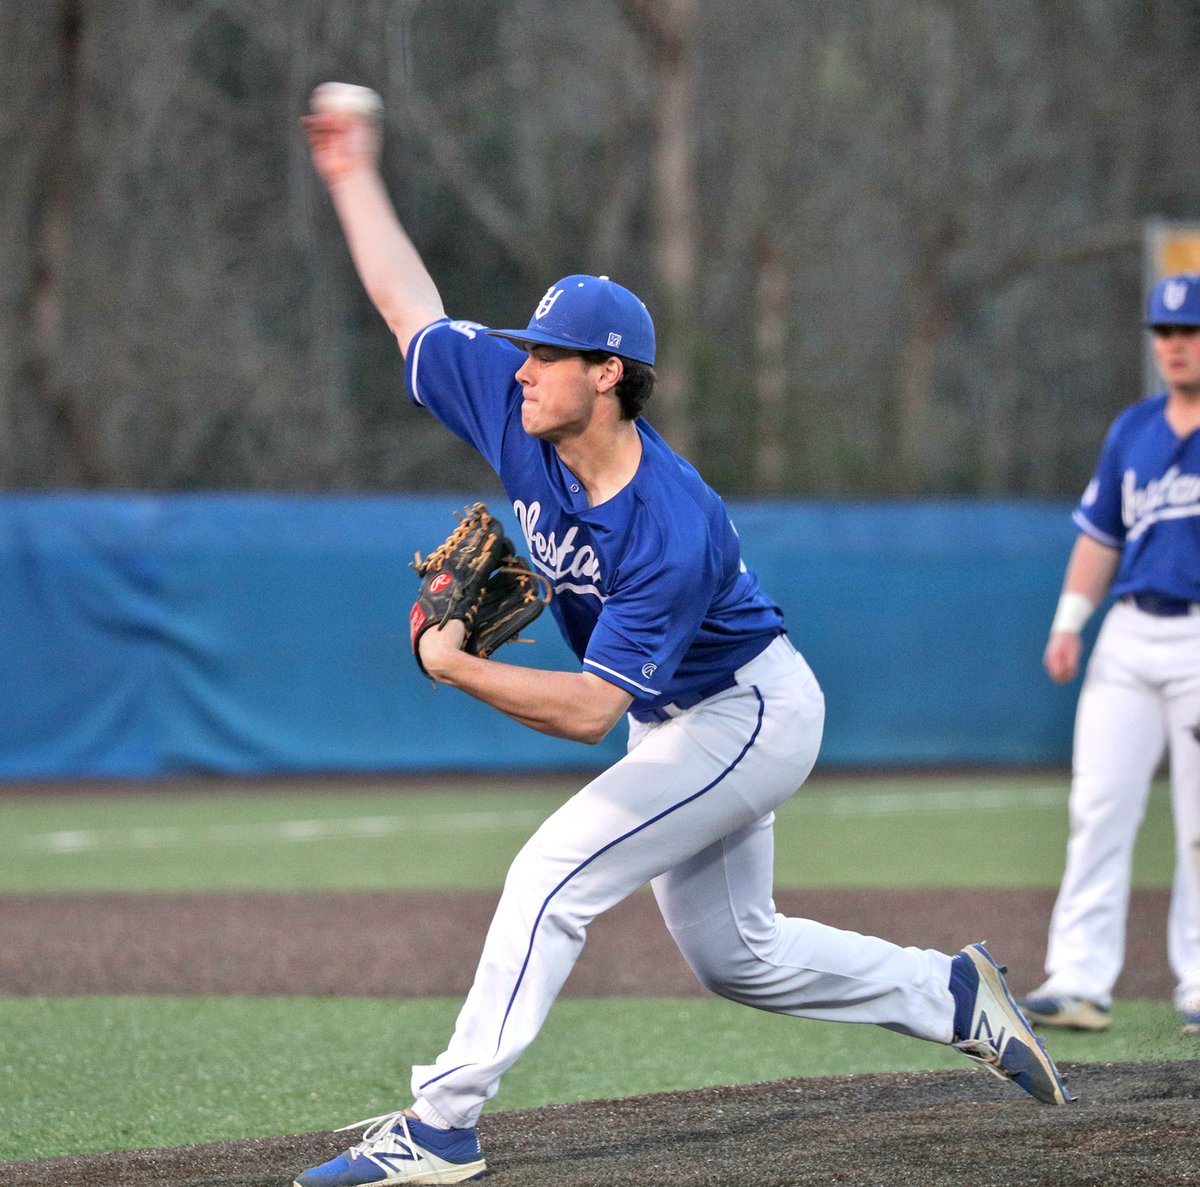 VHHS baseball looking to go from good to great - VestaviaVoice.com